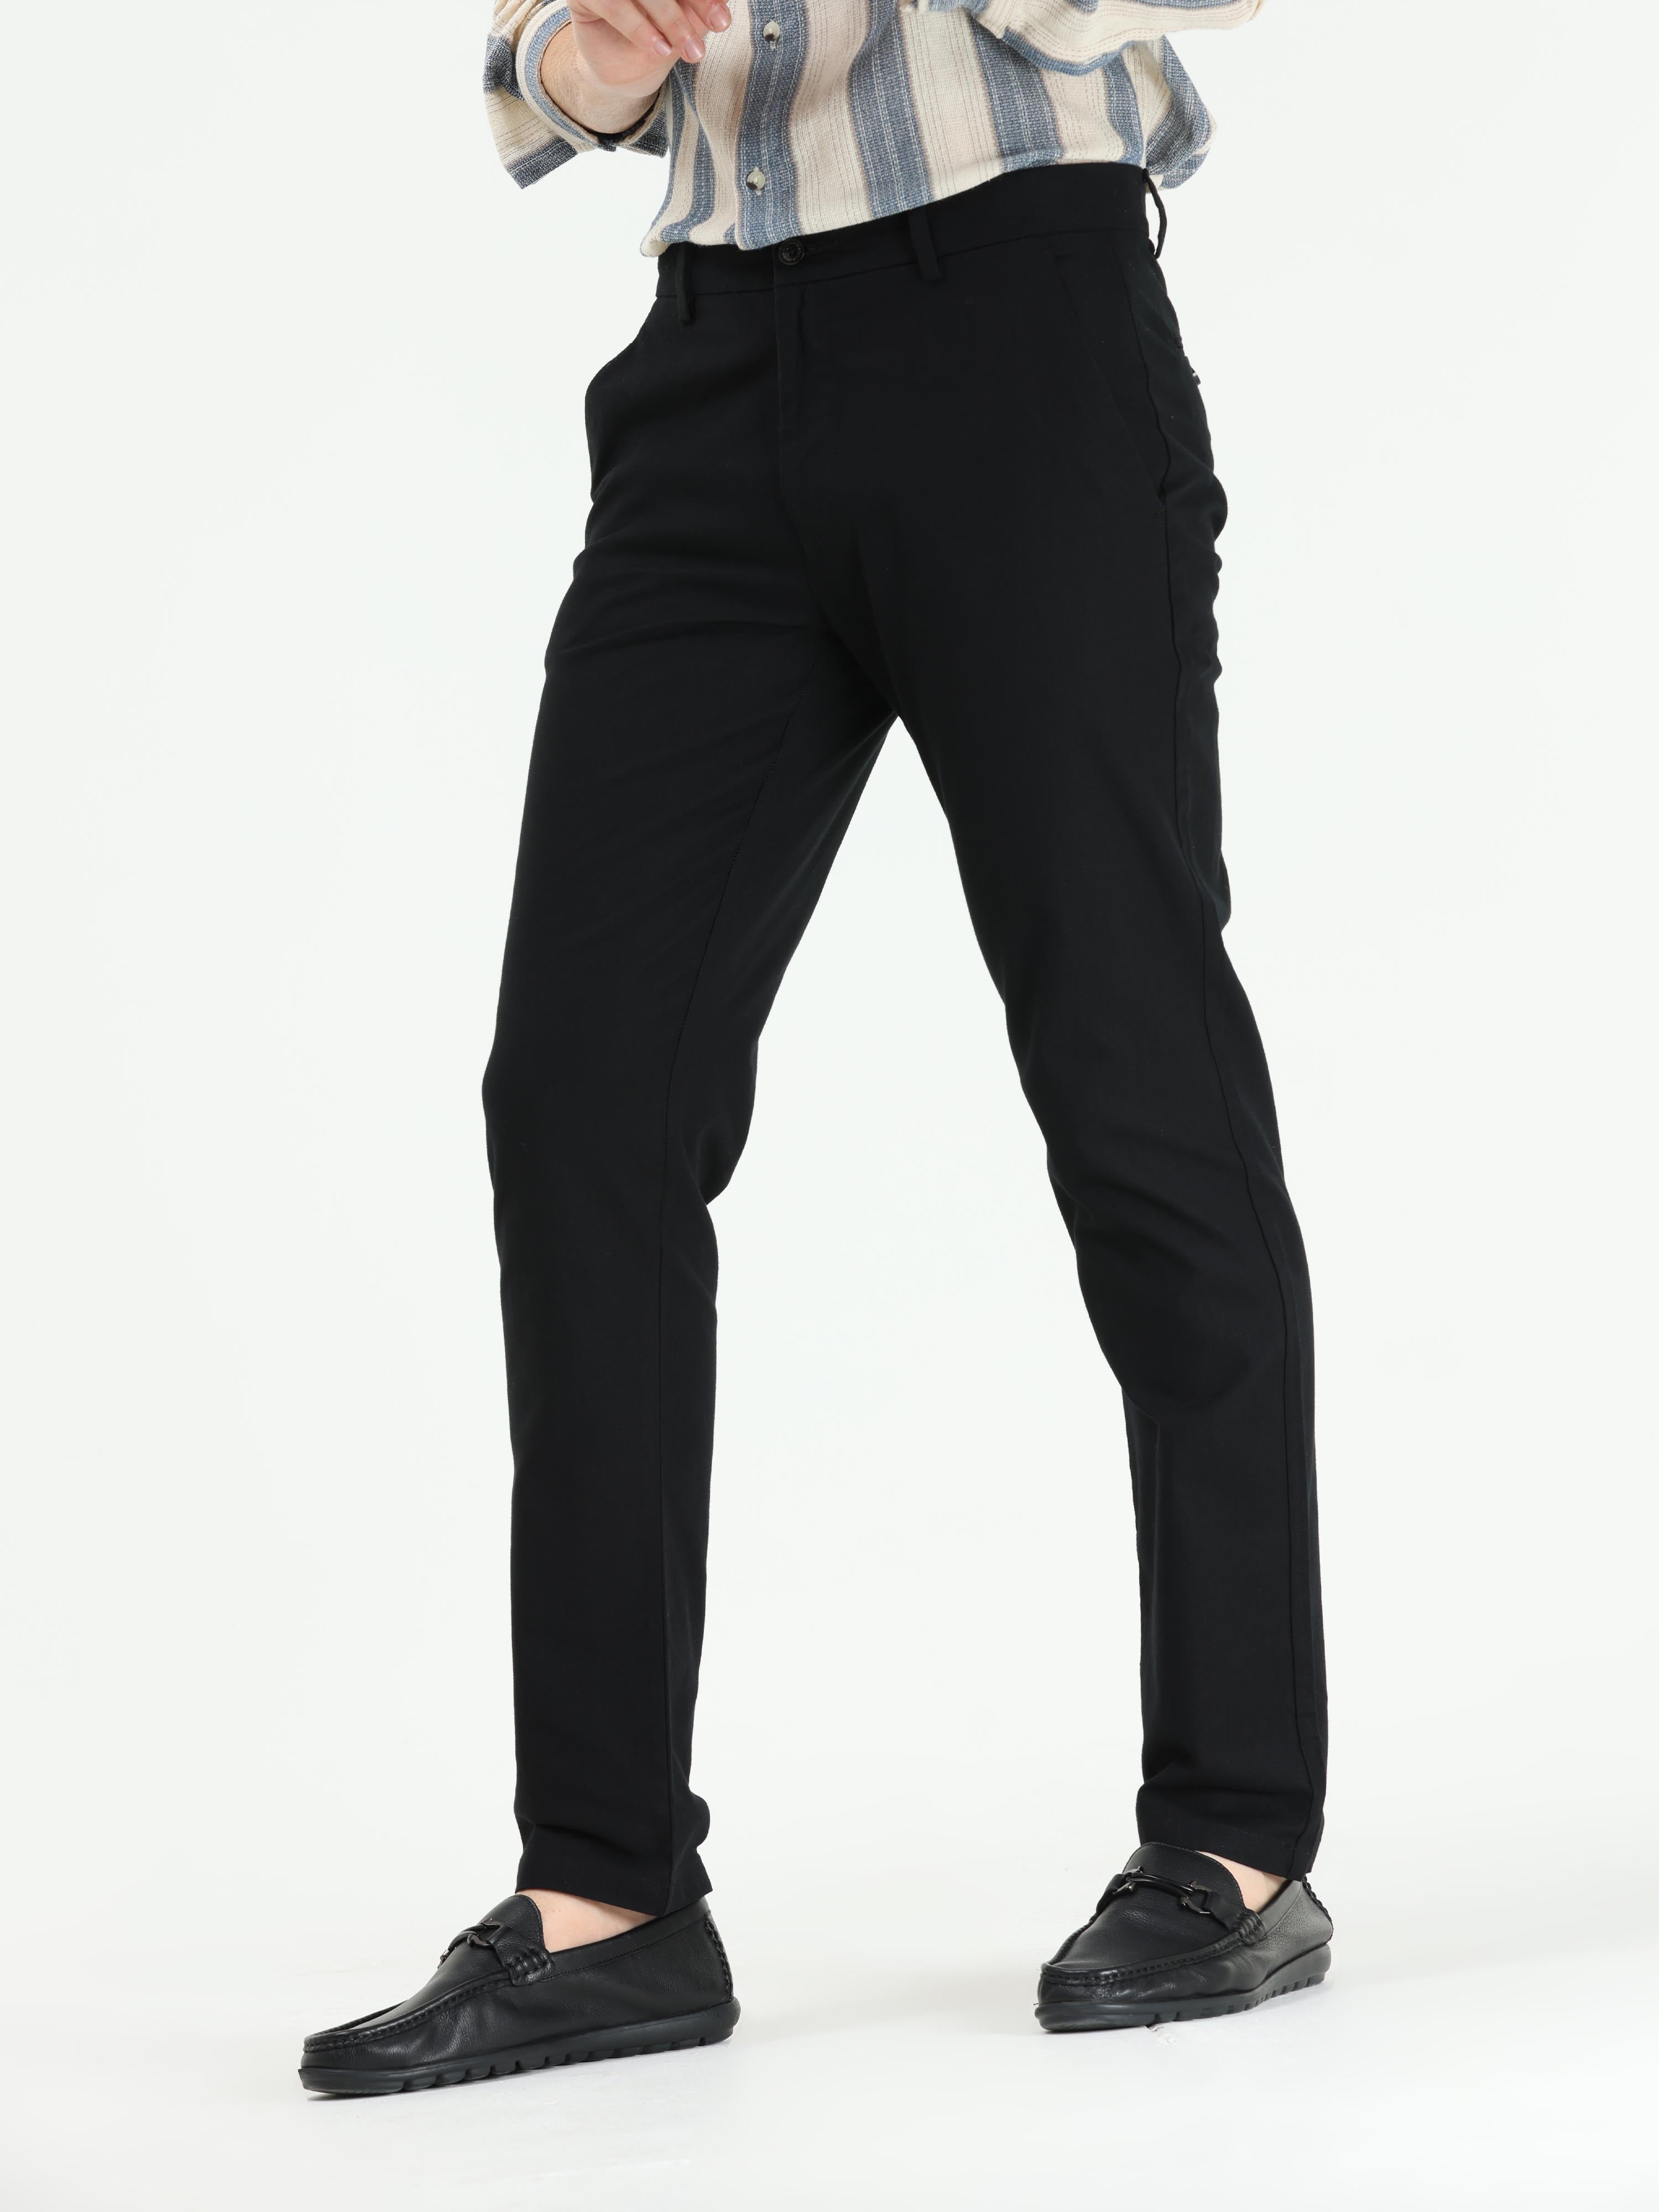 Buy AD by Arvind Men Black Regular Fit Solid Casual Chinos - NNNOW.com